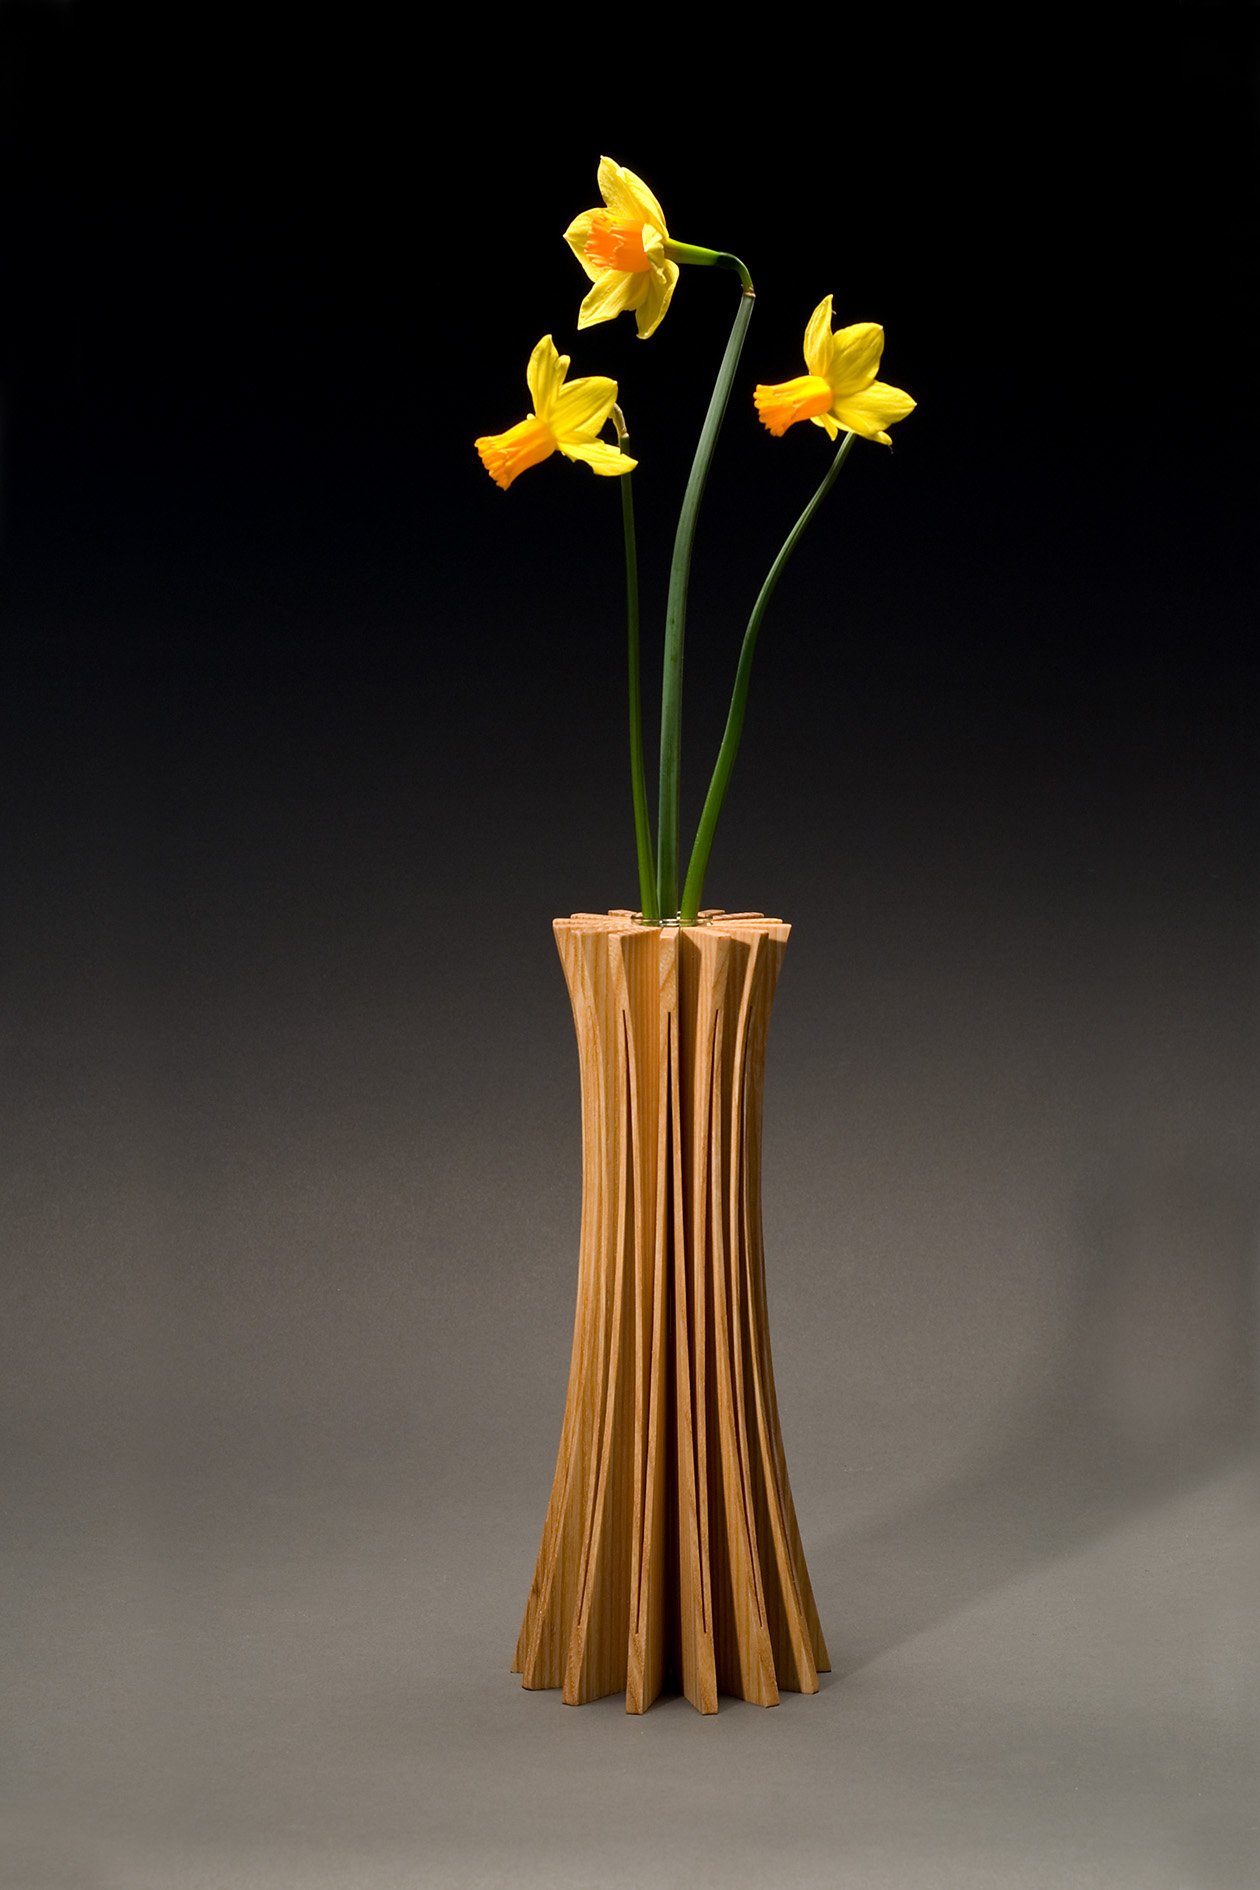 Solid Wood Handcrafted Vases & Bookends - Seth Rolland